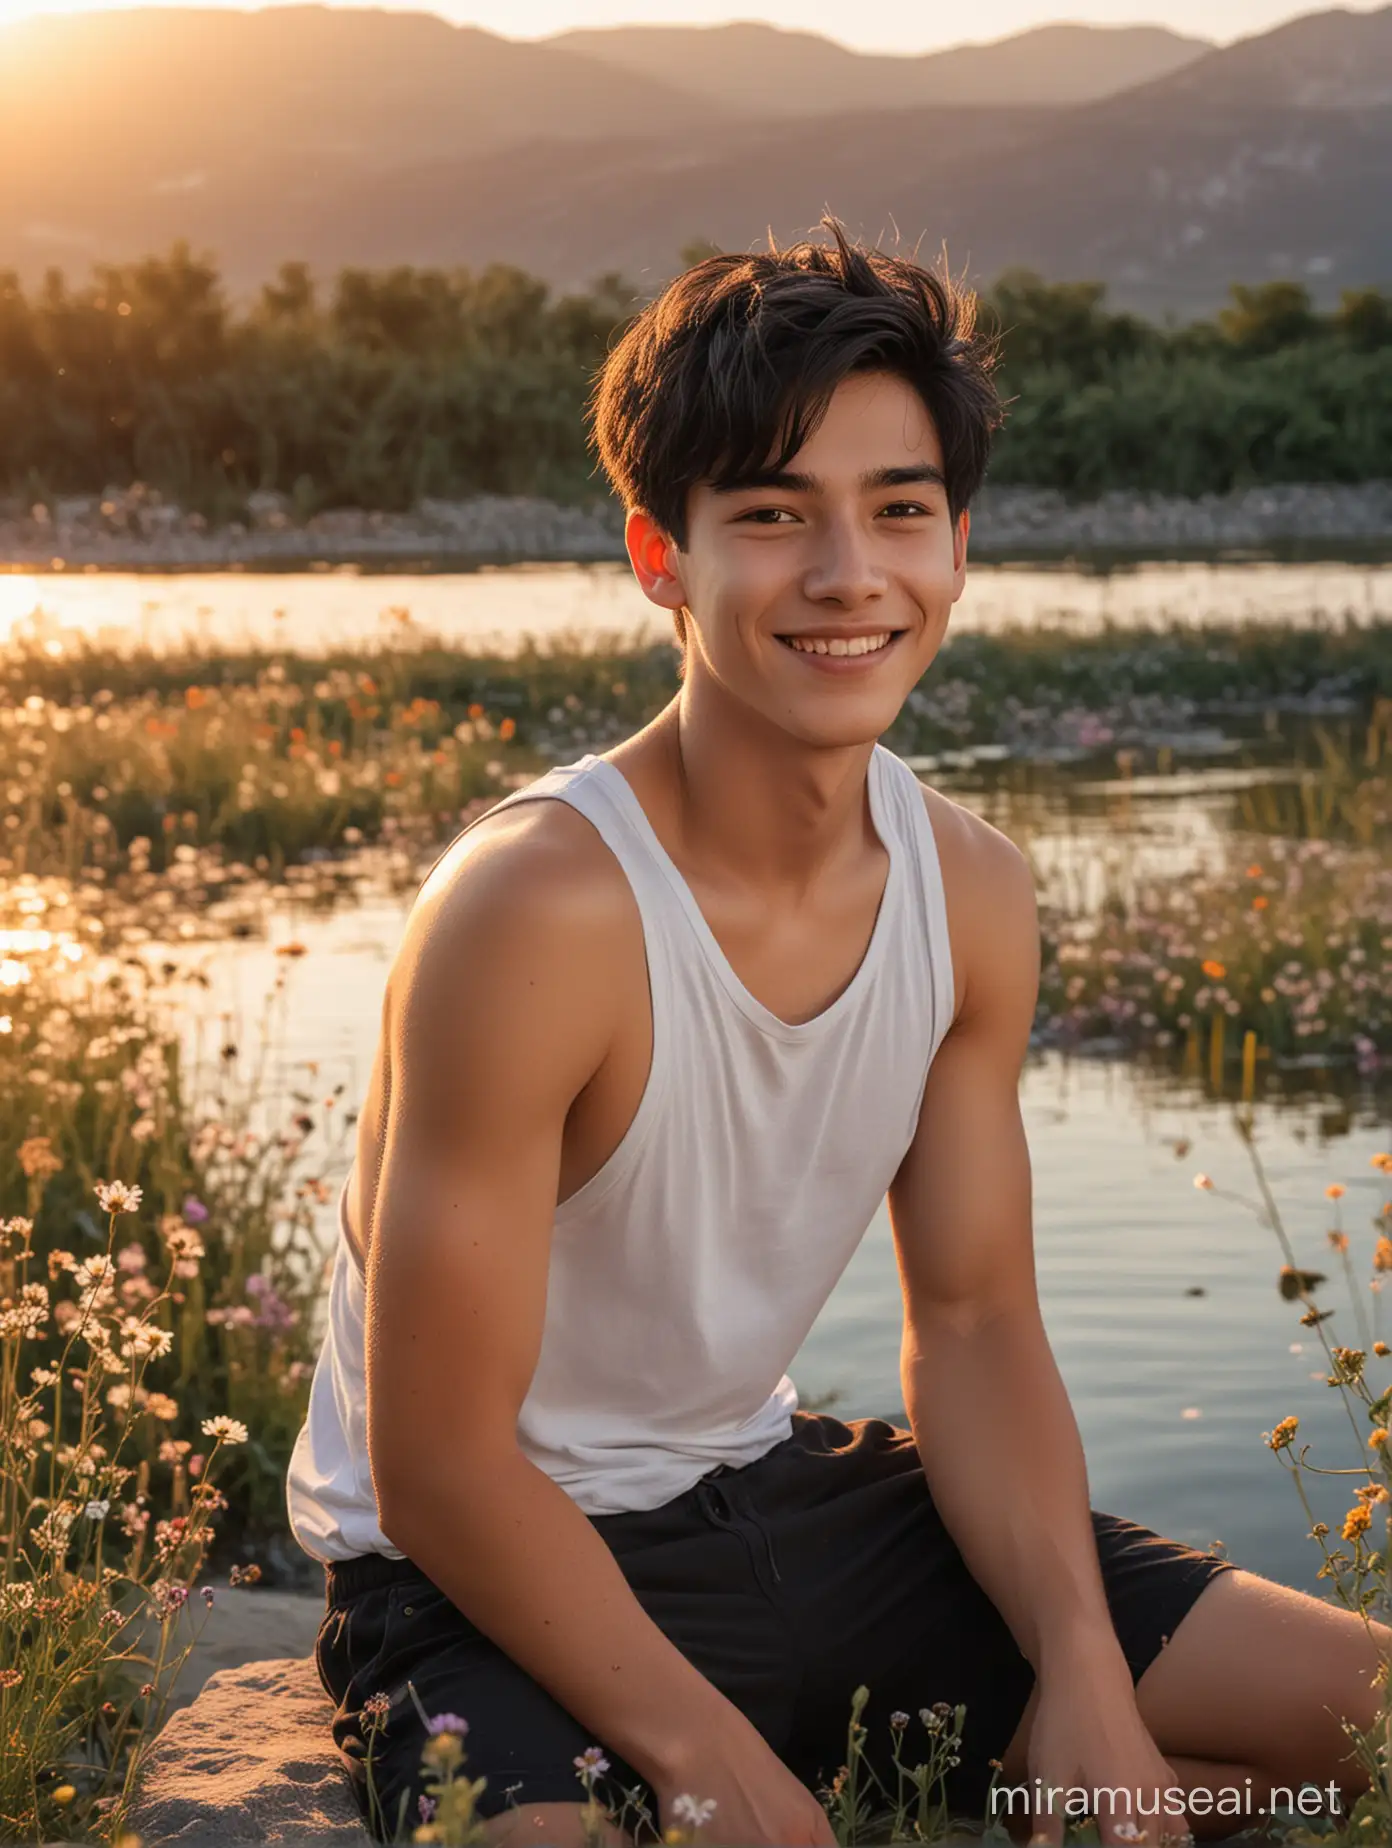 Smiling Teenager Sitting by a Lake at Sunset Surrounded by Wildflowers